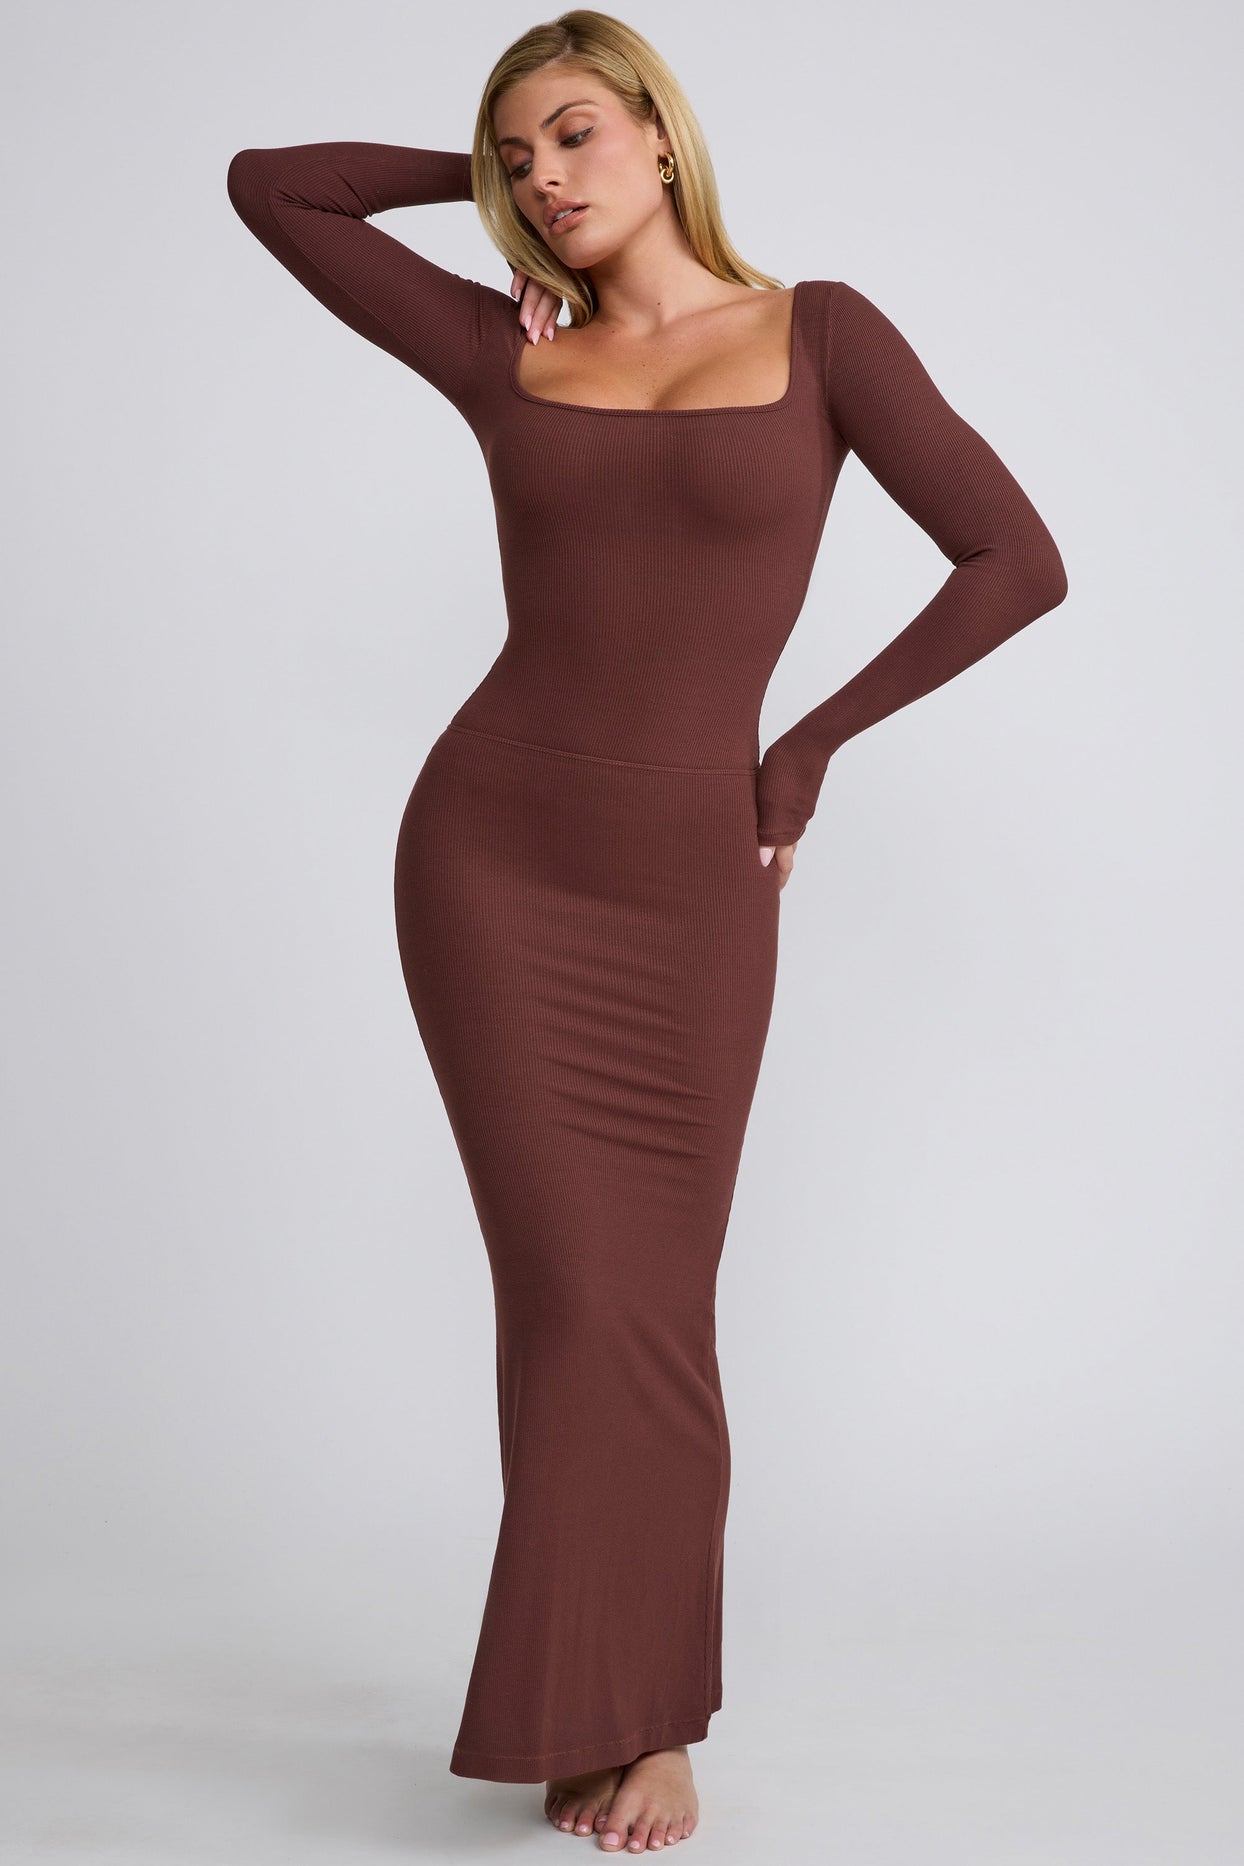 Ribbed Modal Square Neck Long Sleeve Top in Chocolate